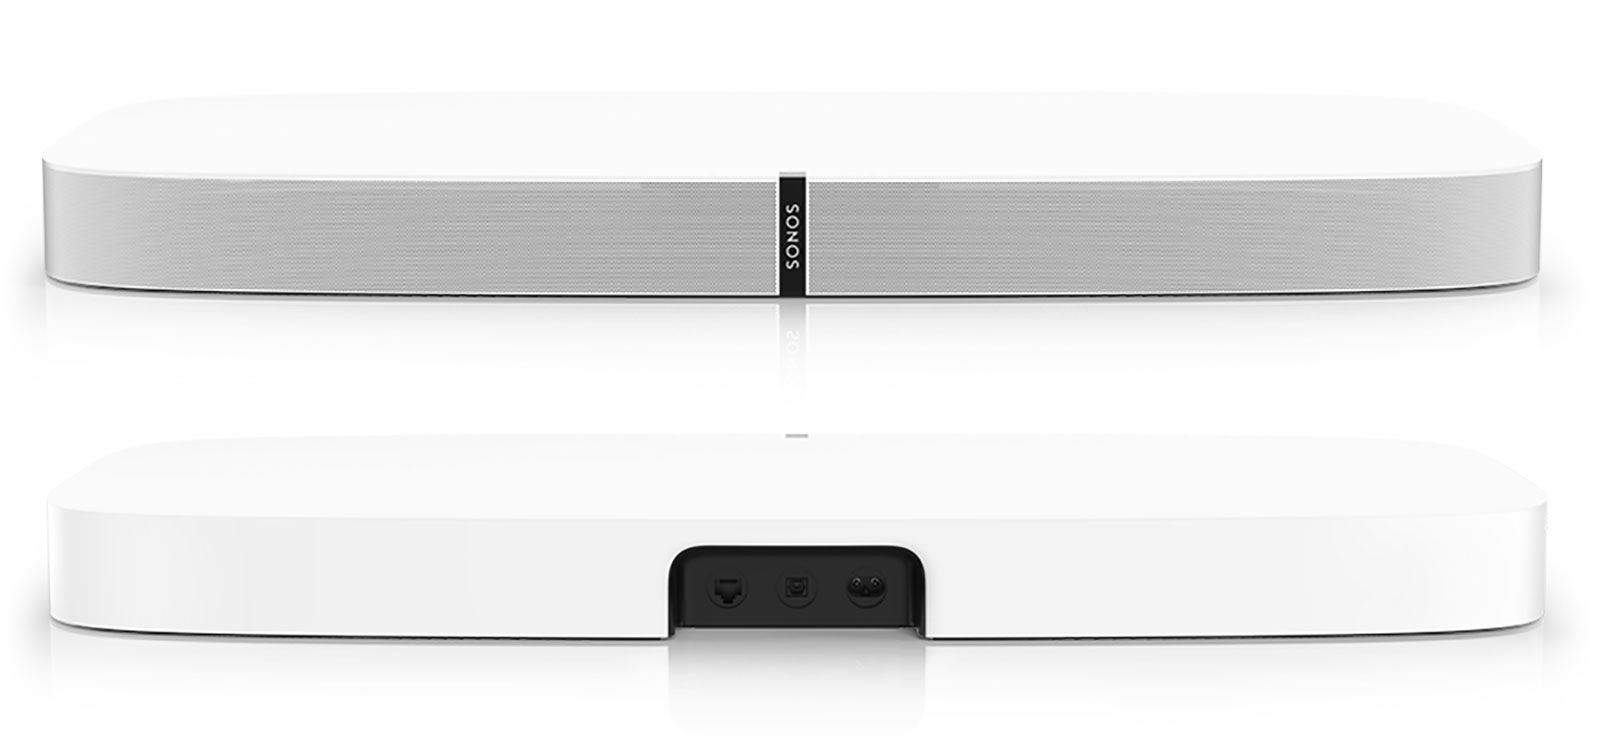 sonos playbase listing leaks online expected in march for 699 image 2